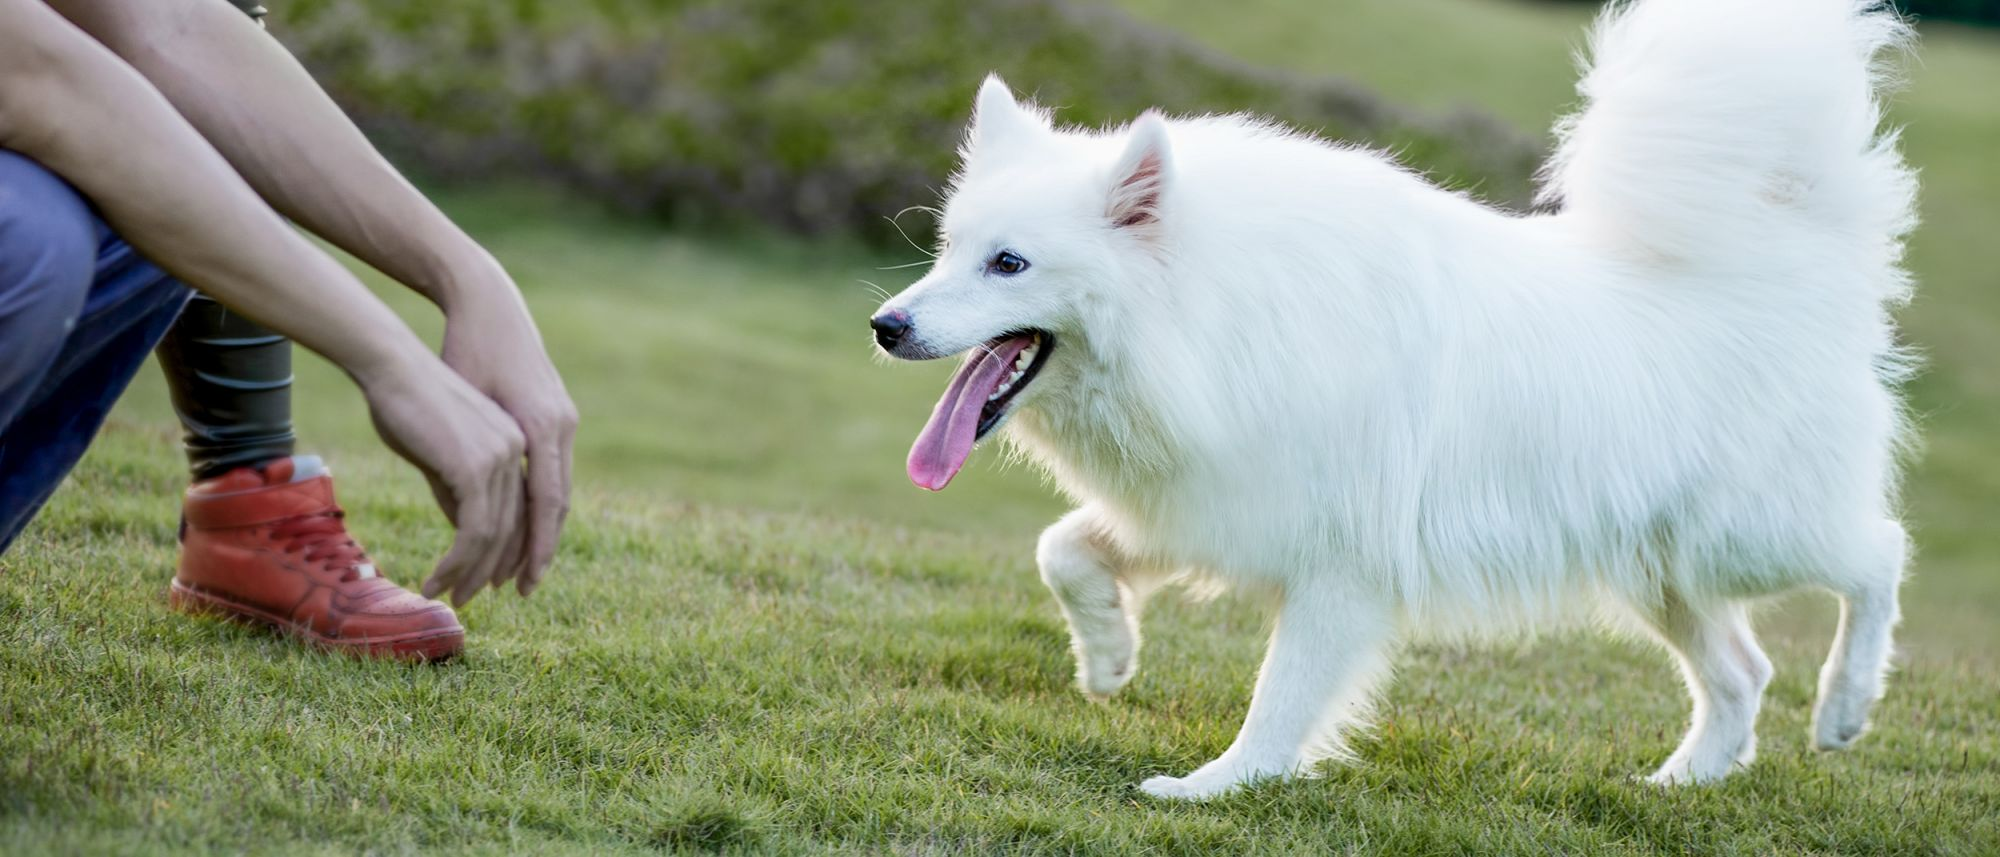 Young Samoyed dog walking towards outstretched hands in a garden